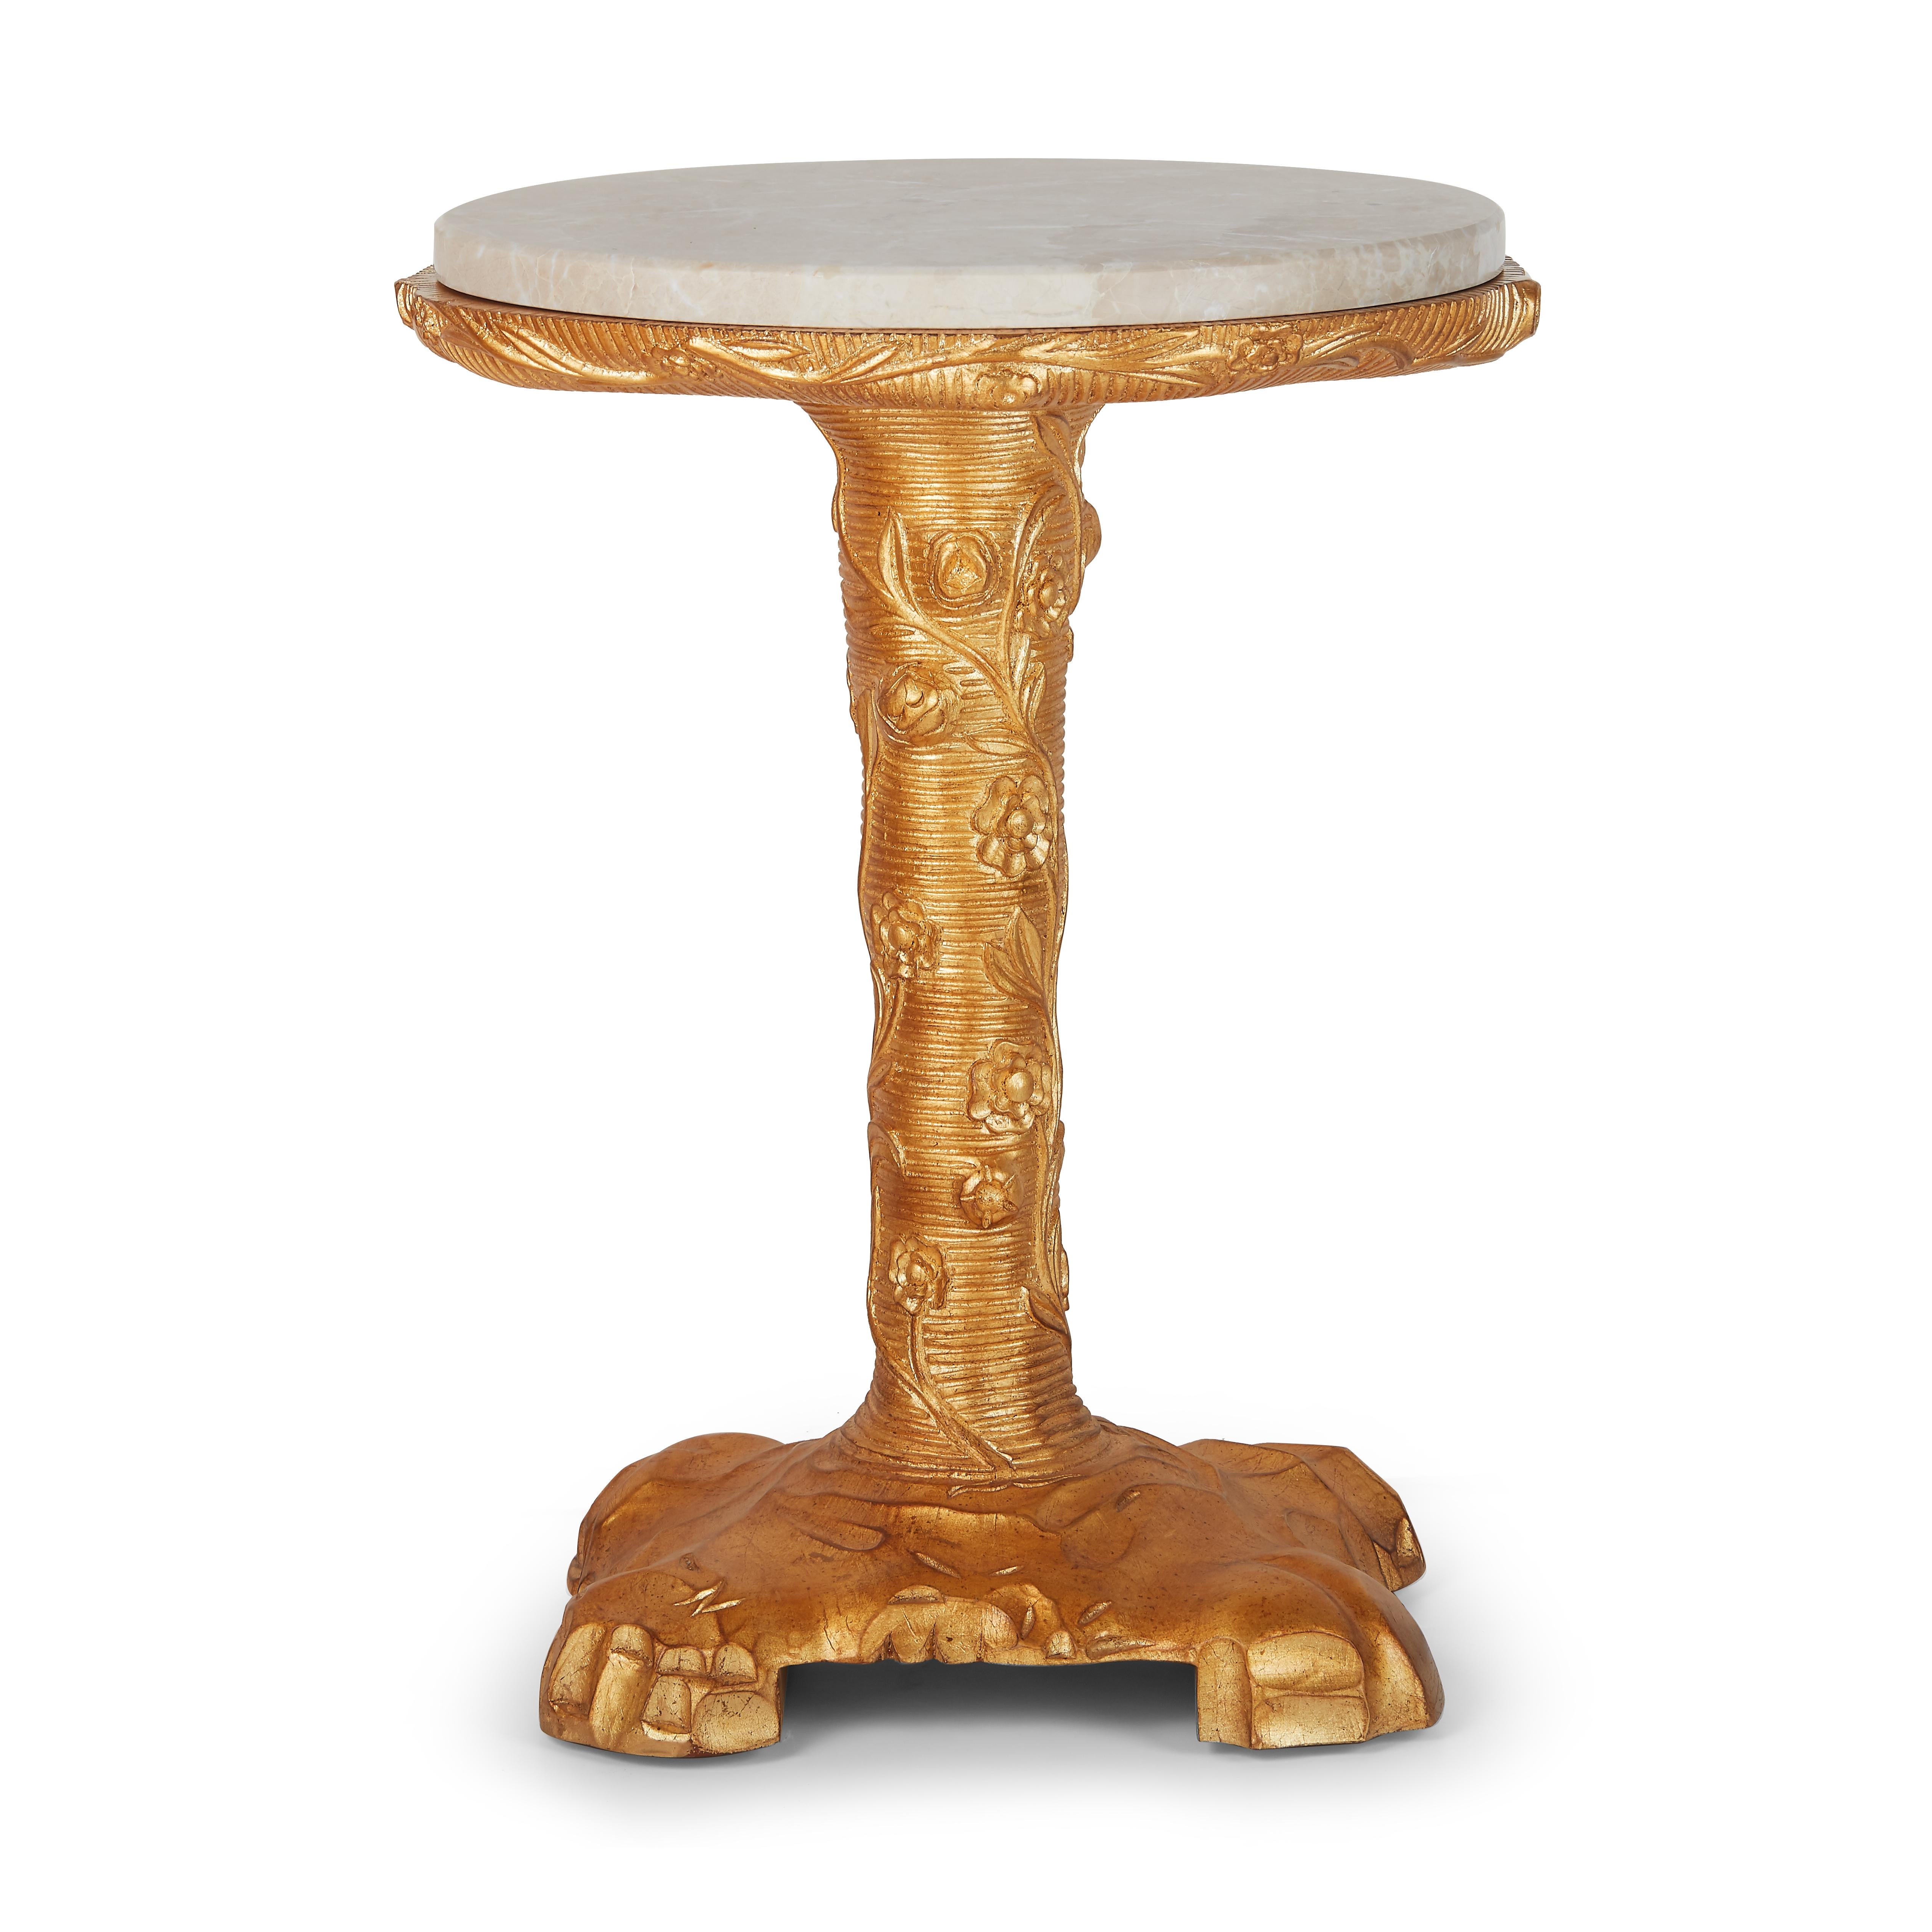 This magical little table is inspired by the 18th century Rococo art movement and truly embodies the joyful decorative nature of the time. Stylized vines, twigs and rock-like motifs gleam with a lustrous hand-gilded finish. The smooth marble top